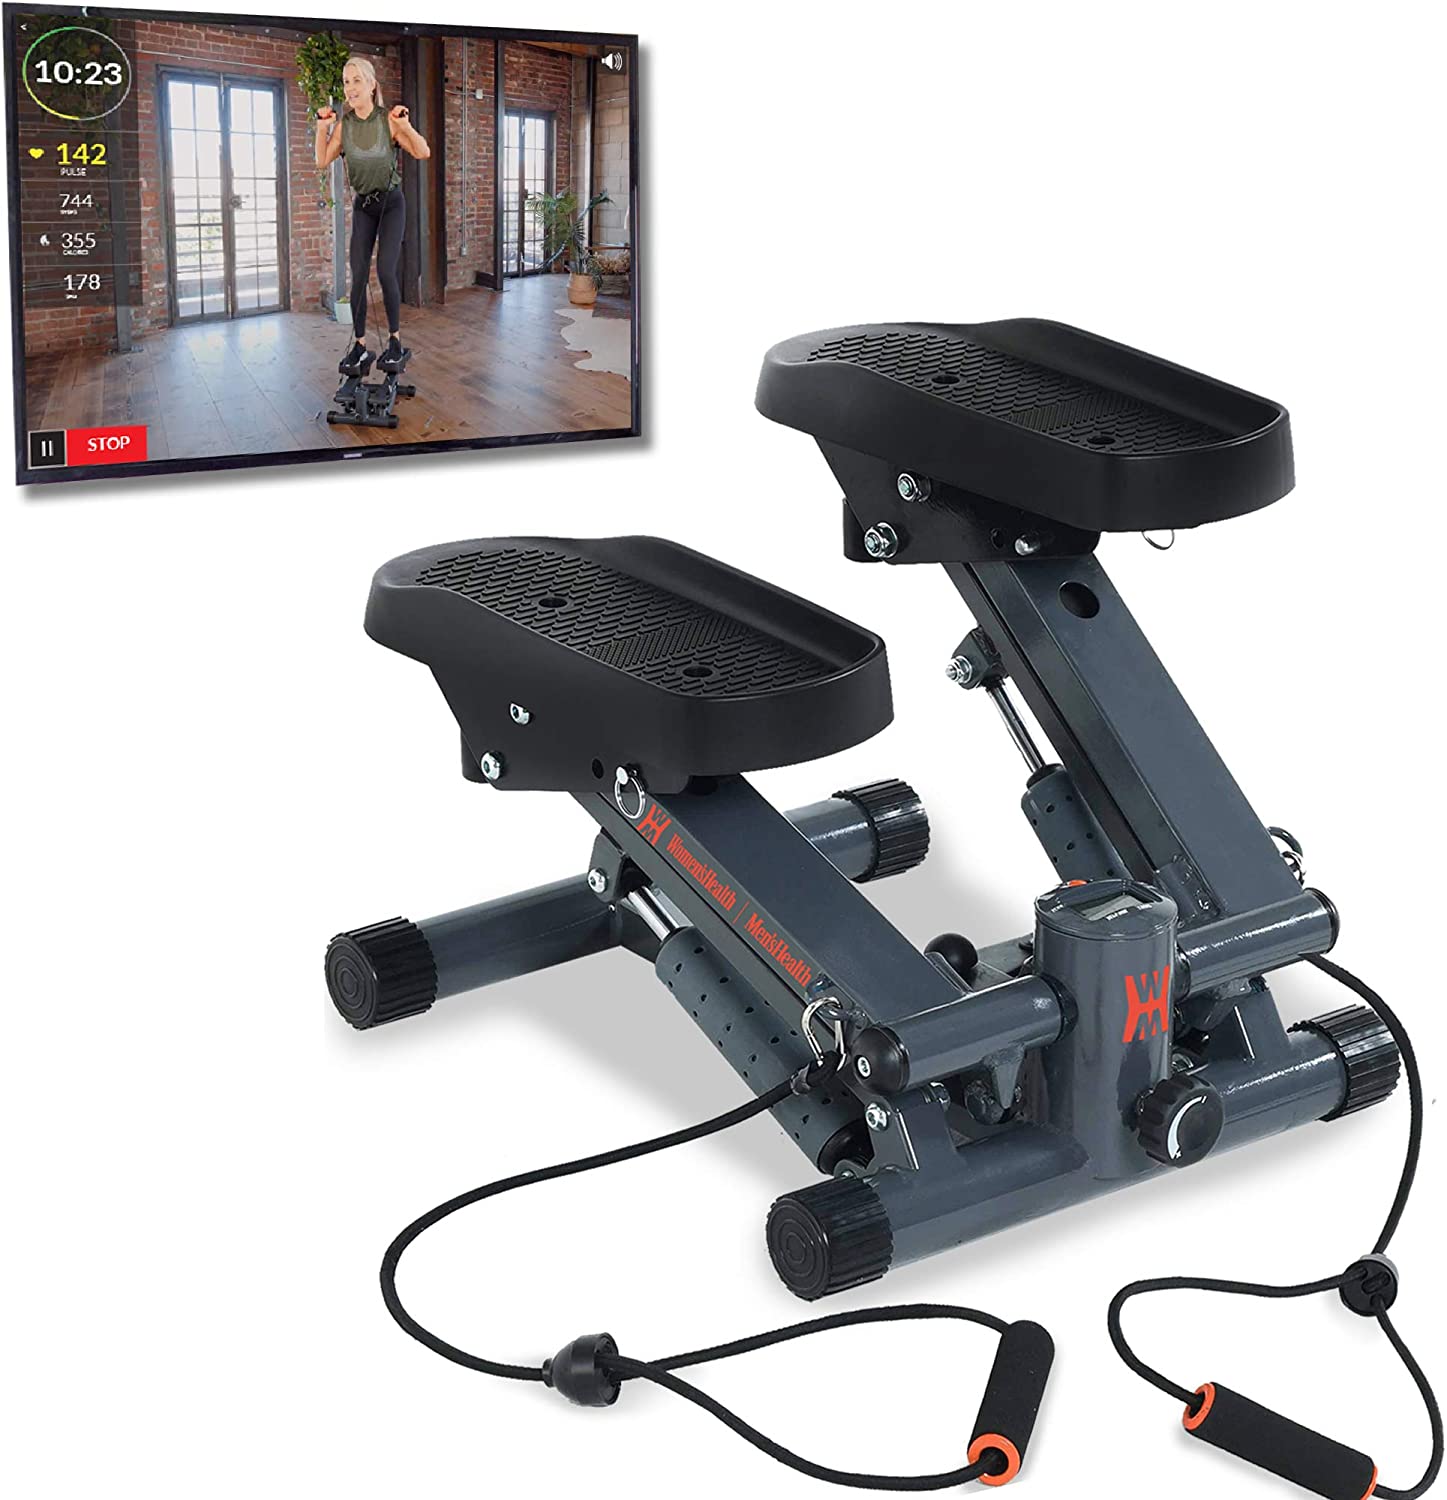 Amazon Women's and Men's Health Bluetooth Cardio Stair Stepper